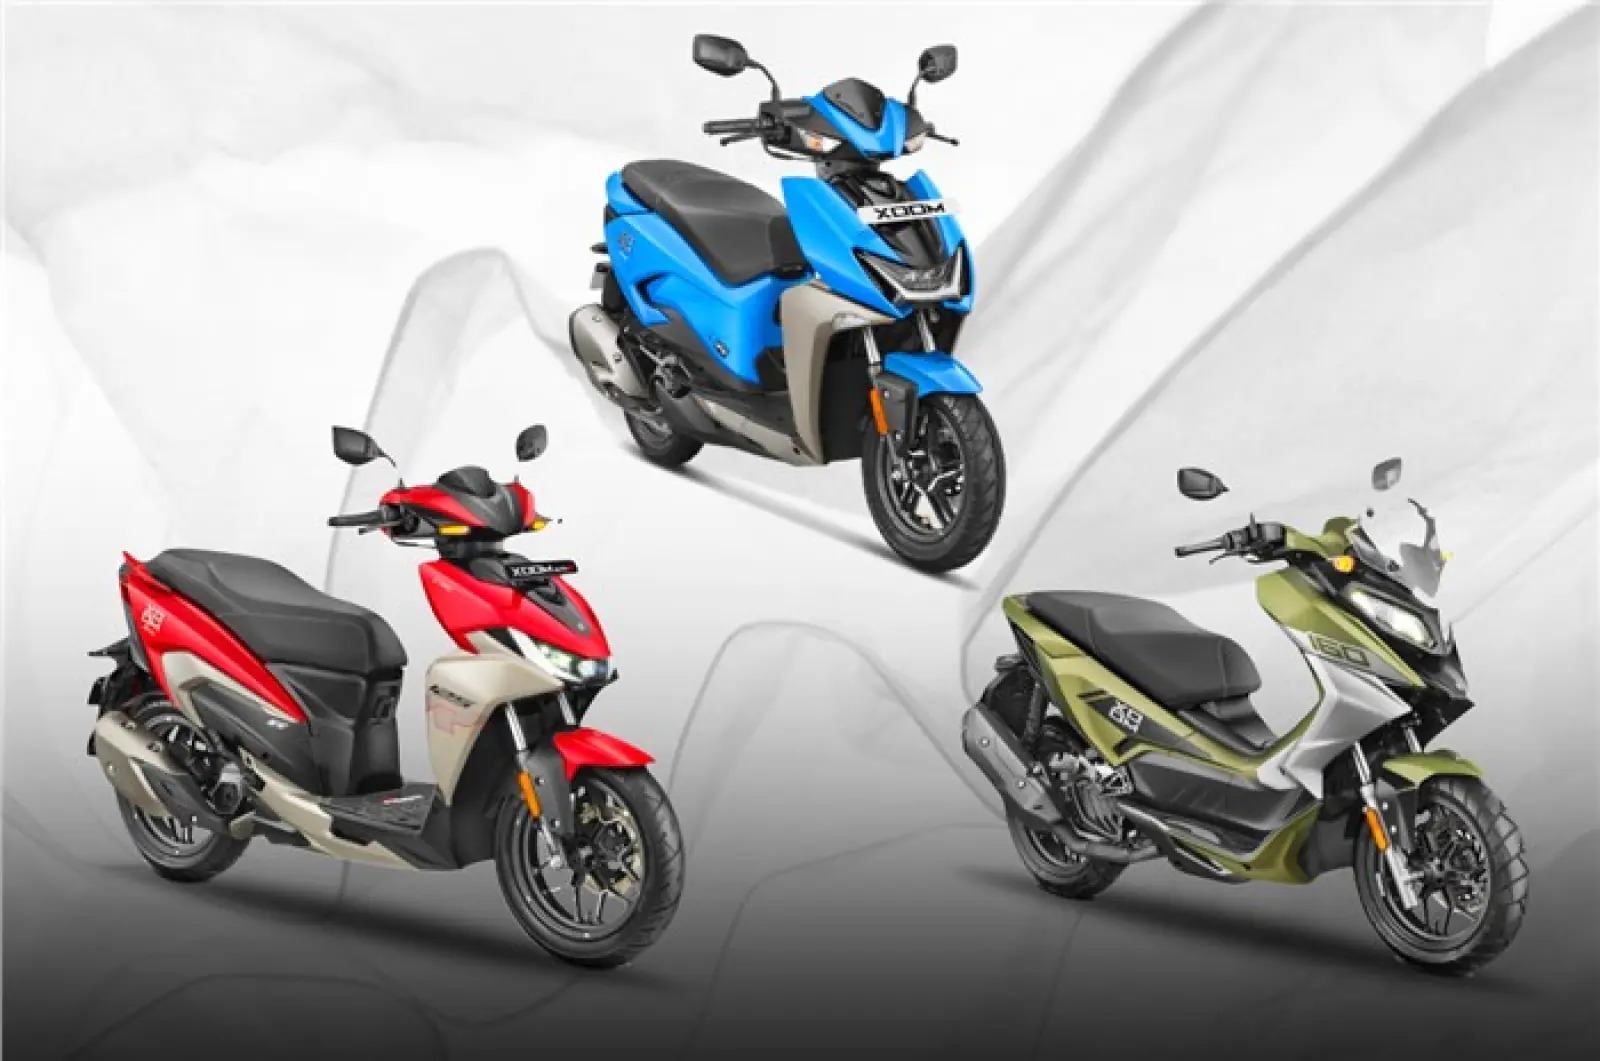 Hero is going to add two new scooters to its Xoom lineup, which will be launched soon